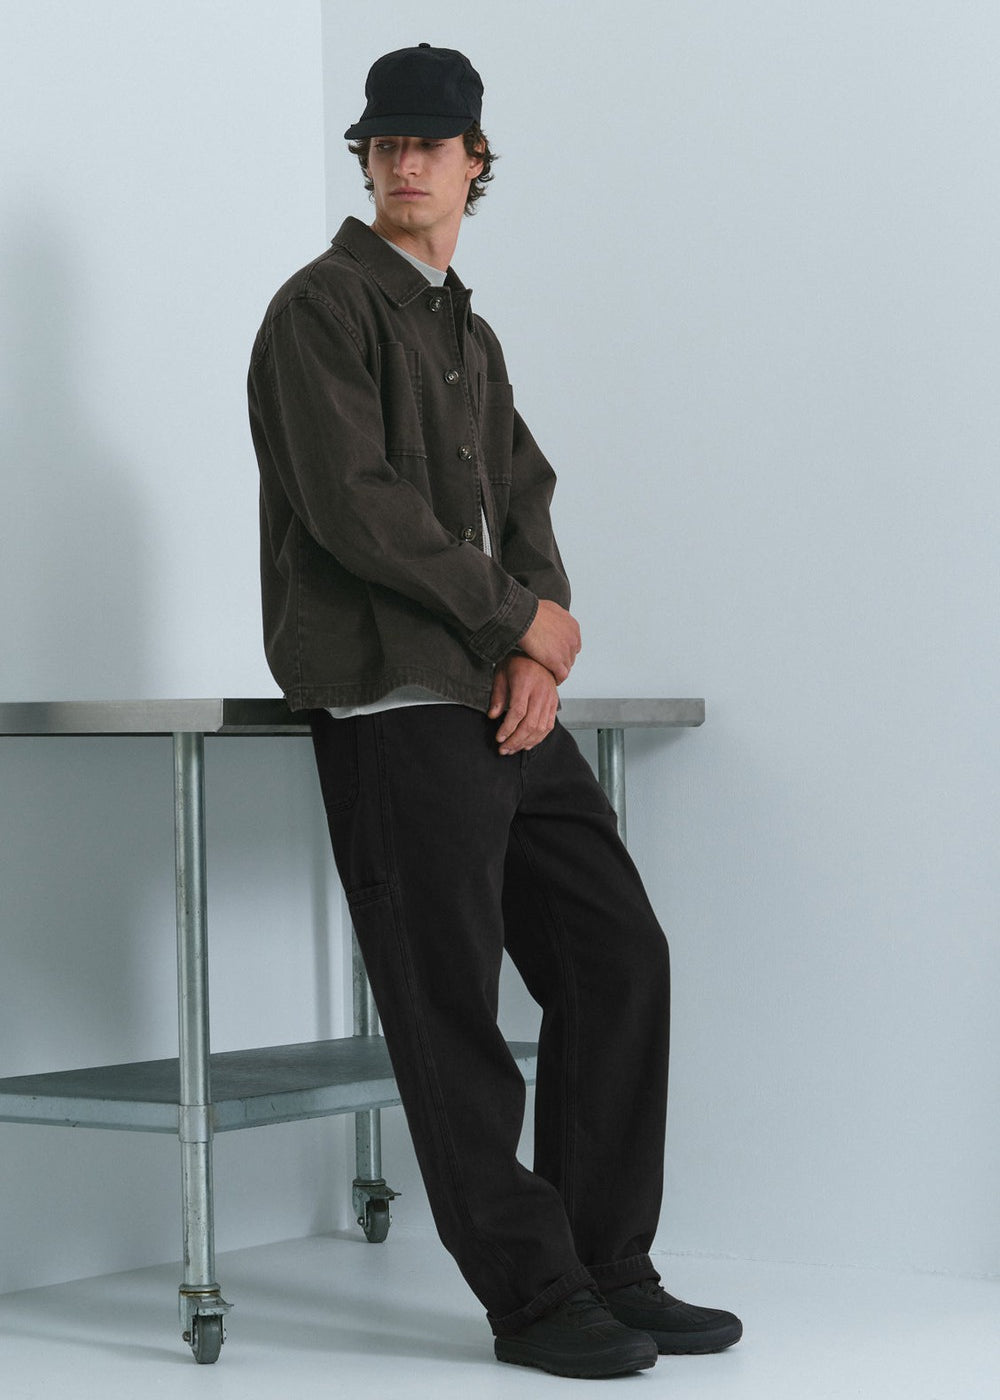 Mens Drill Work Pant - Vintage Black | COMMONERS | Mad About The Boy